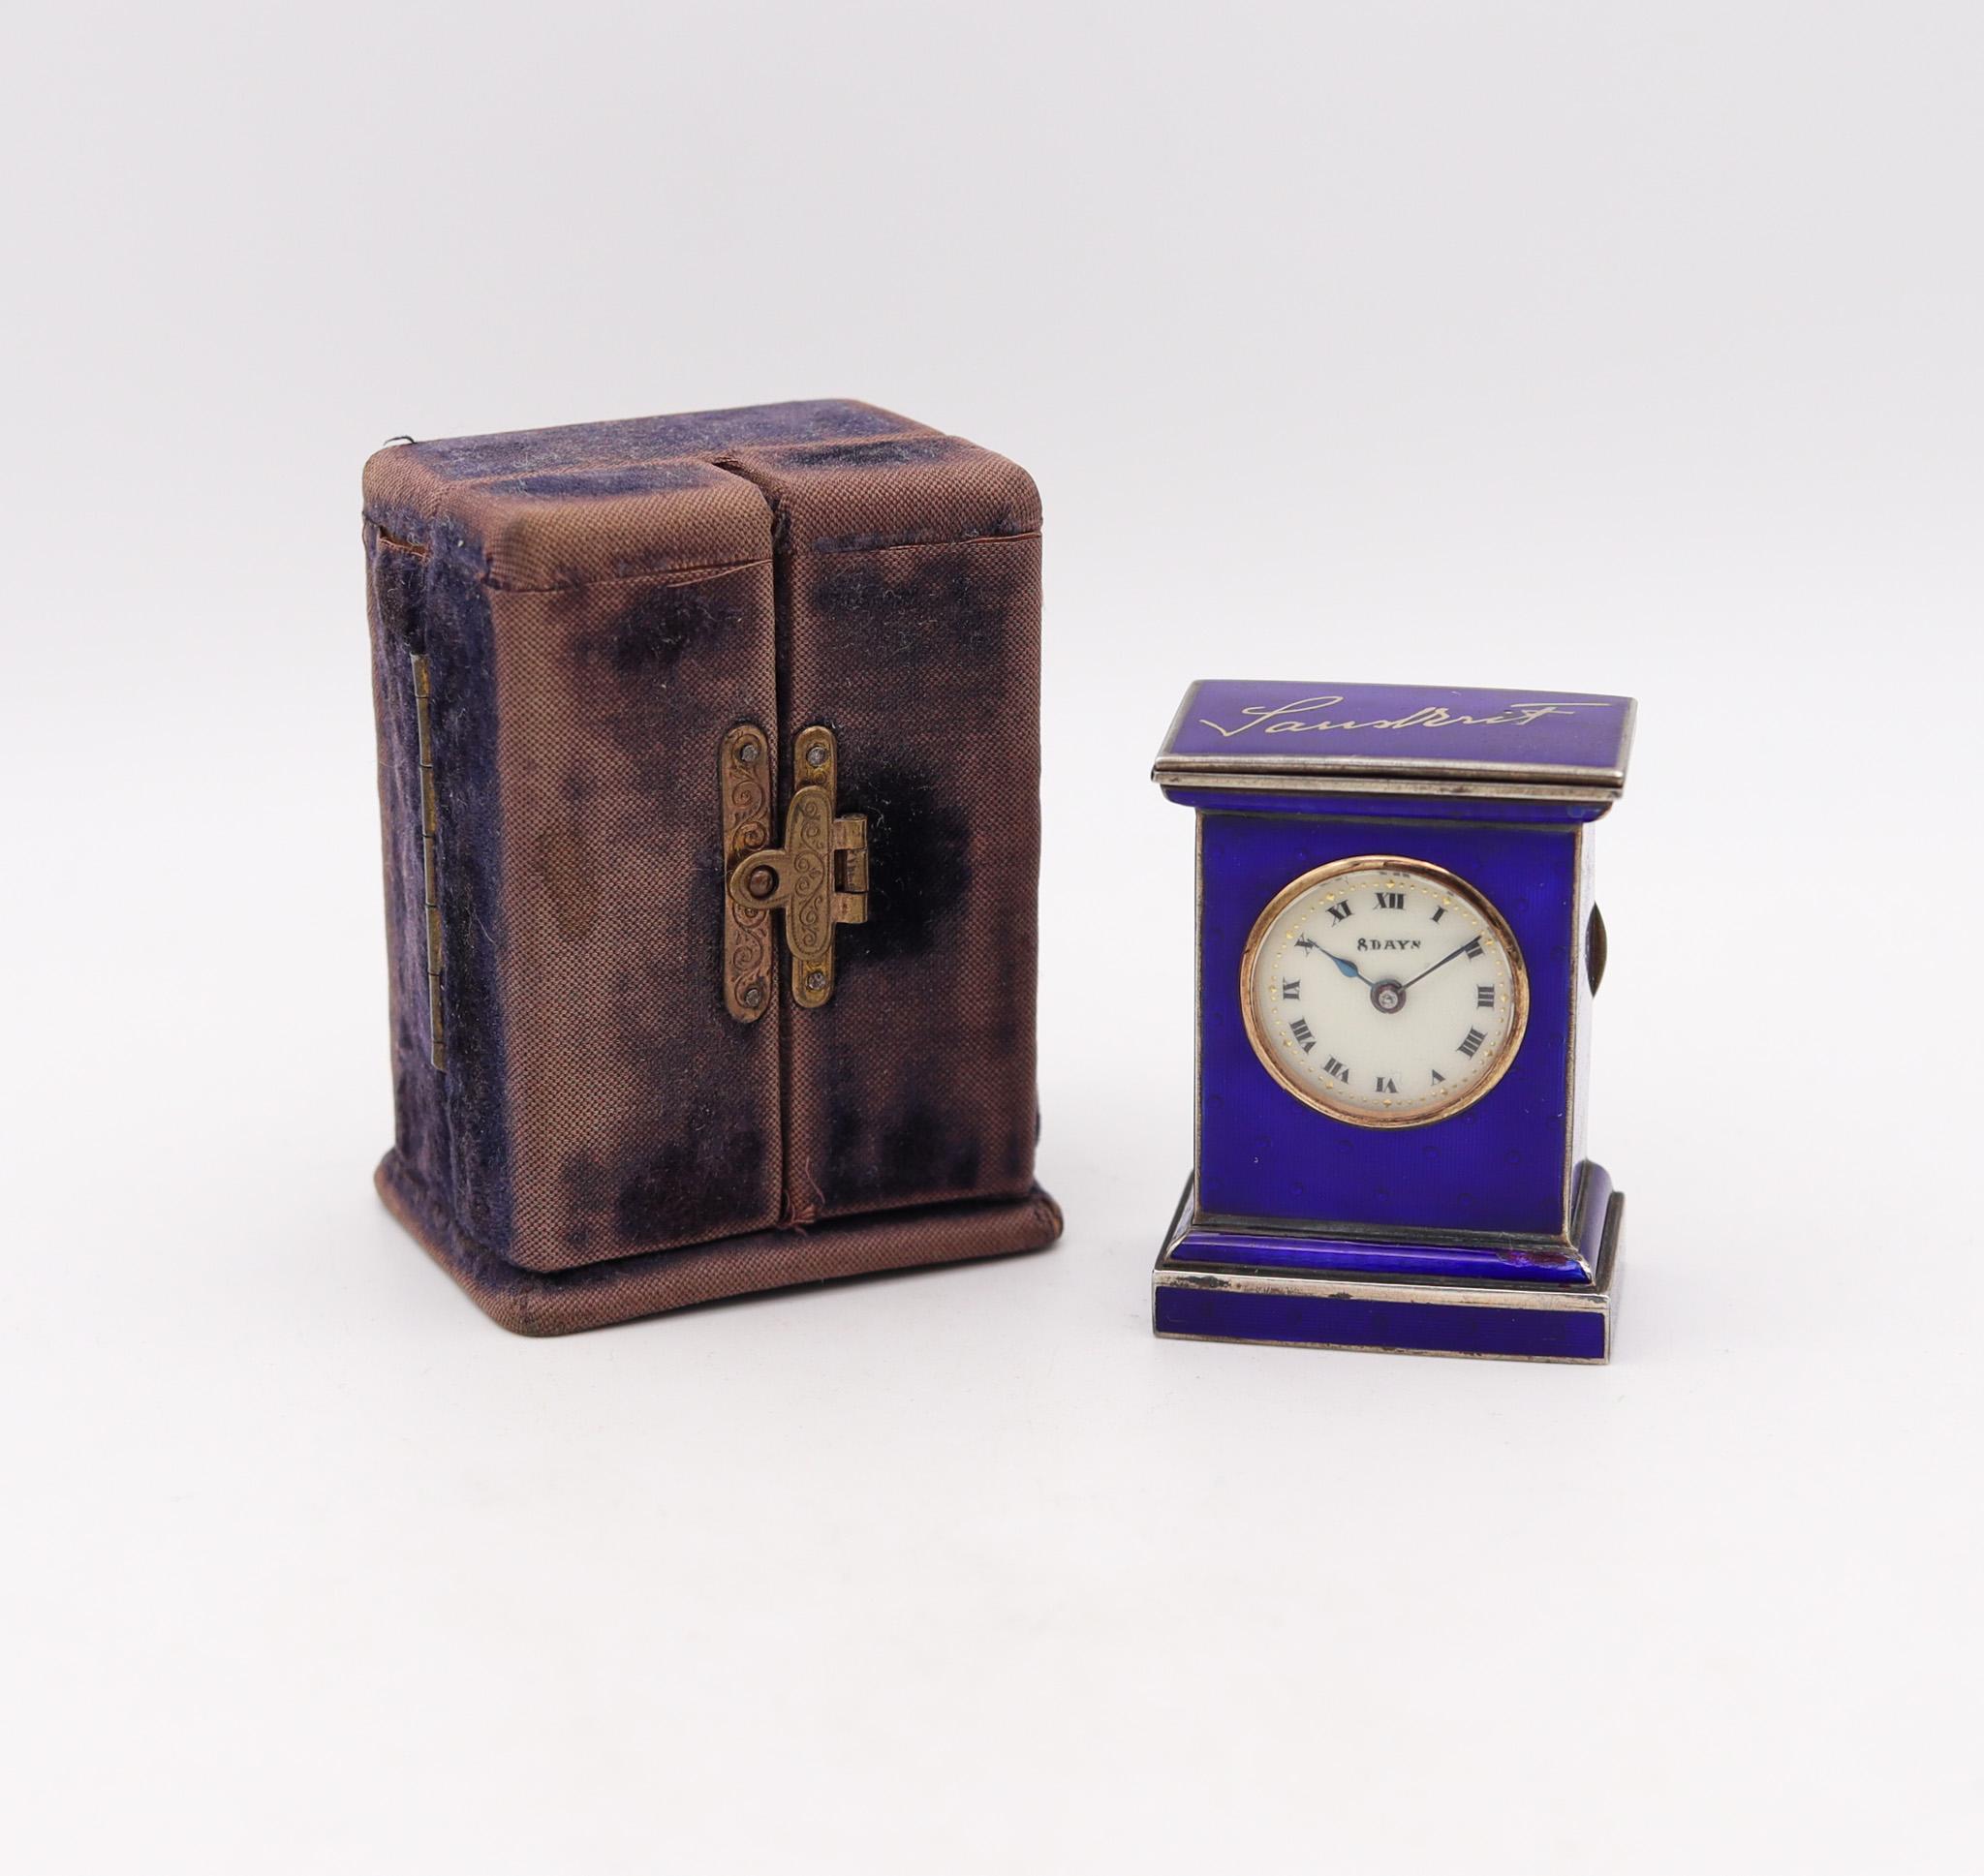 A miniature travel clock designed by Valmé.

Stunning miniature travel-carriage clock, made in Geneva Switzerland by the Valmé Swiss Co. This little antique clock is exceptional, created during the art deco period, back in the 1920. It was crafted